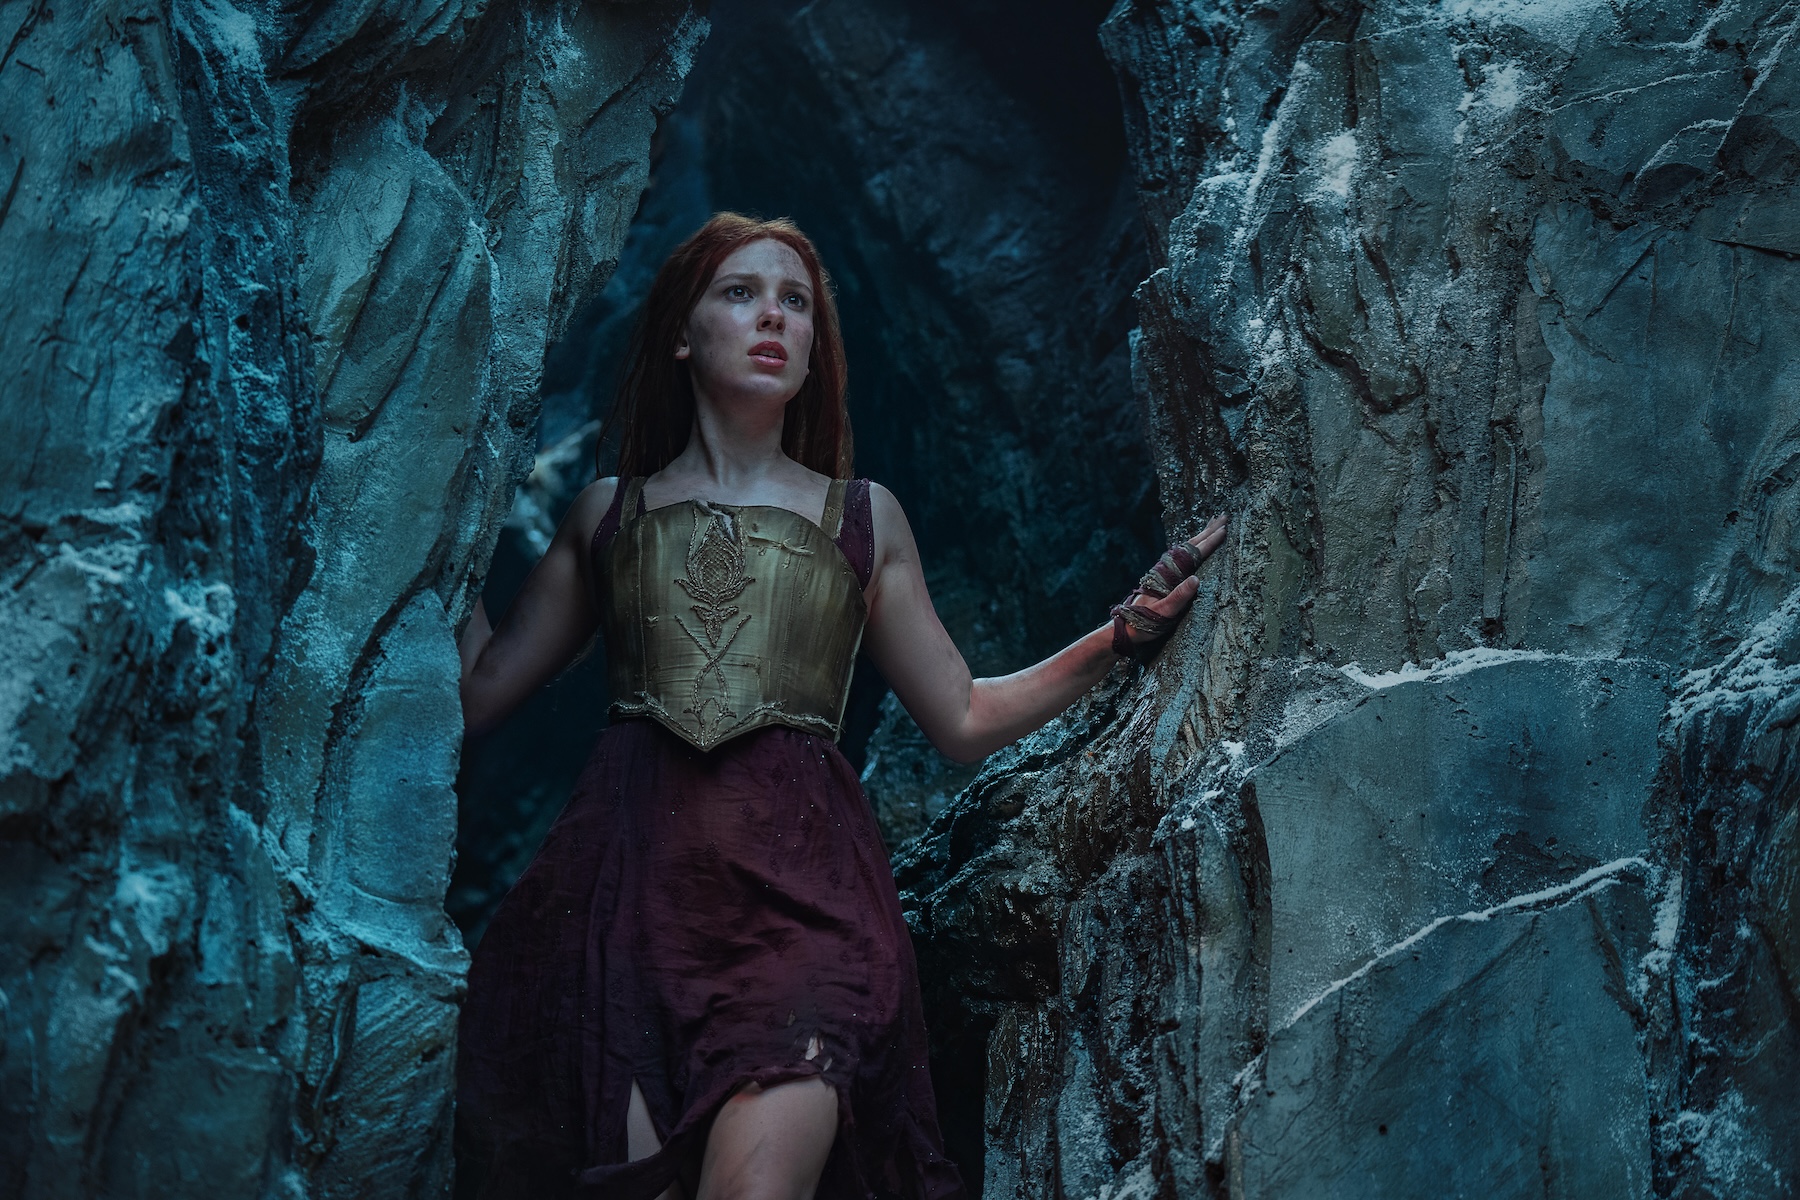 millie bobby brown stands in a cave in the netflix movie 'damsel'